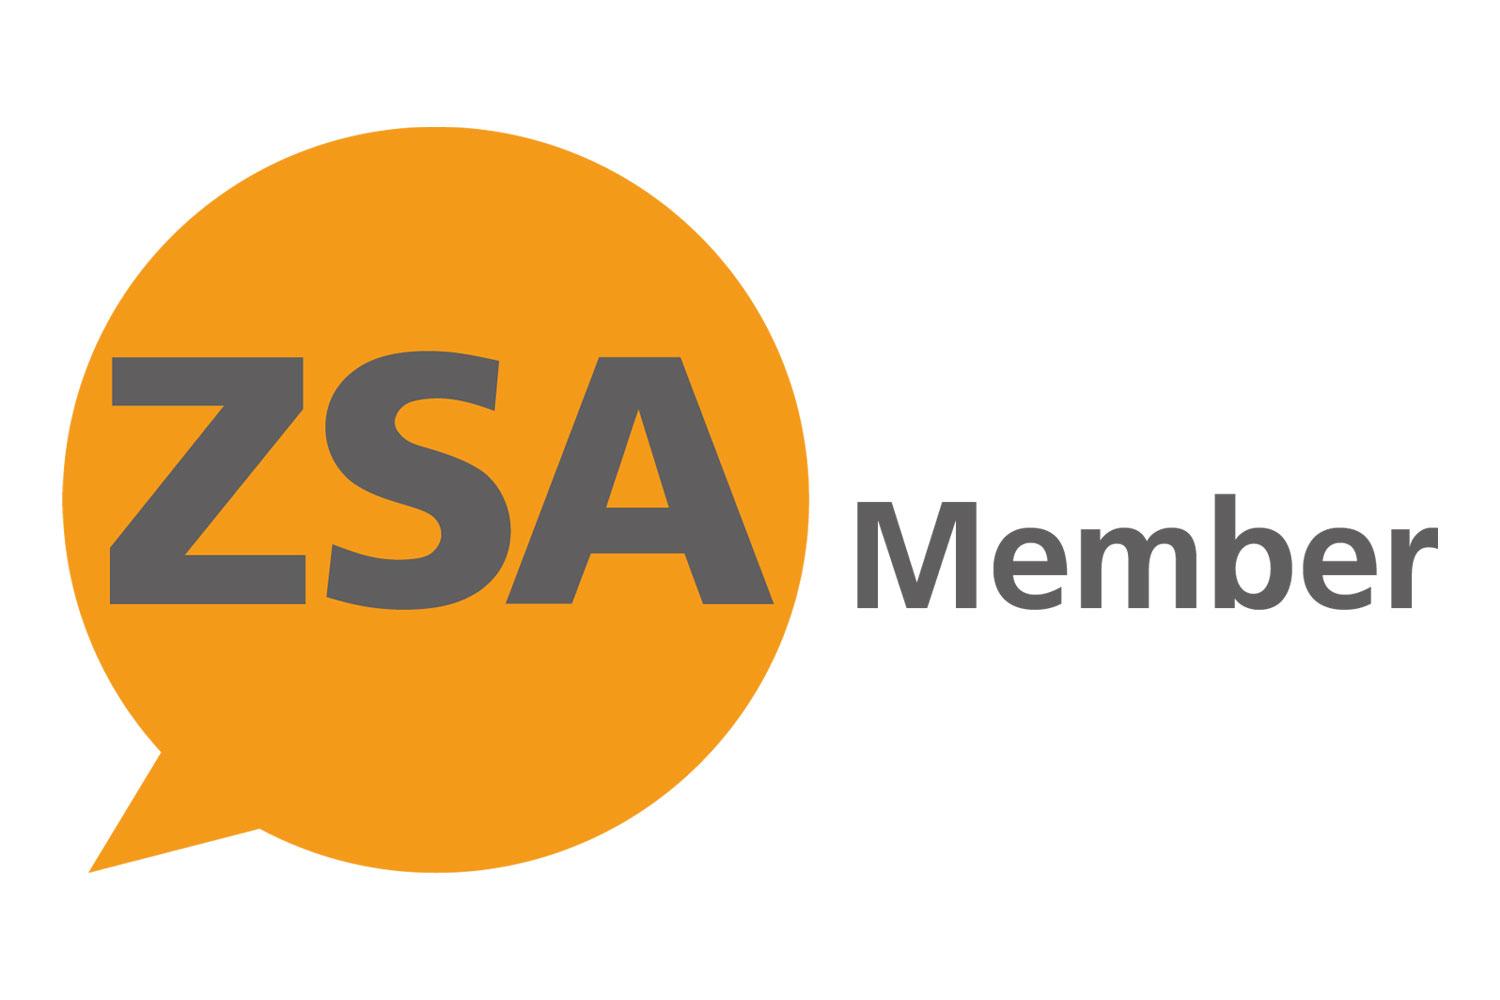 Logo with the letters 'ZSA' in a speech bubble next to the word 'Member'